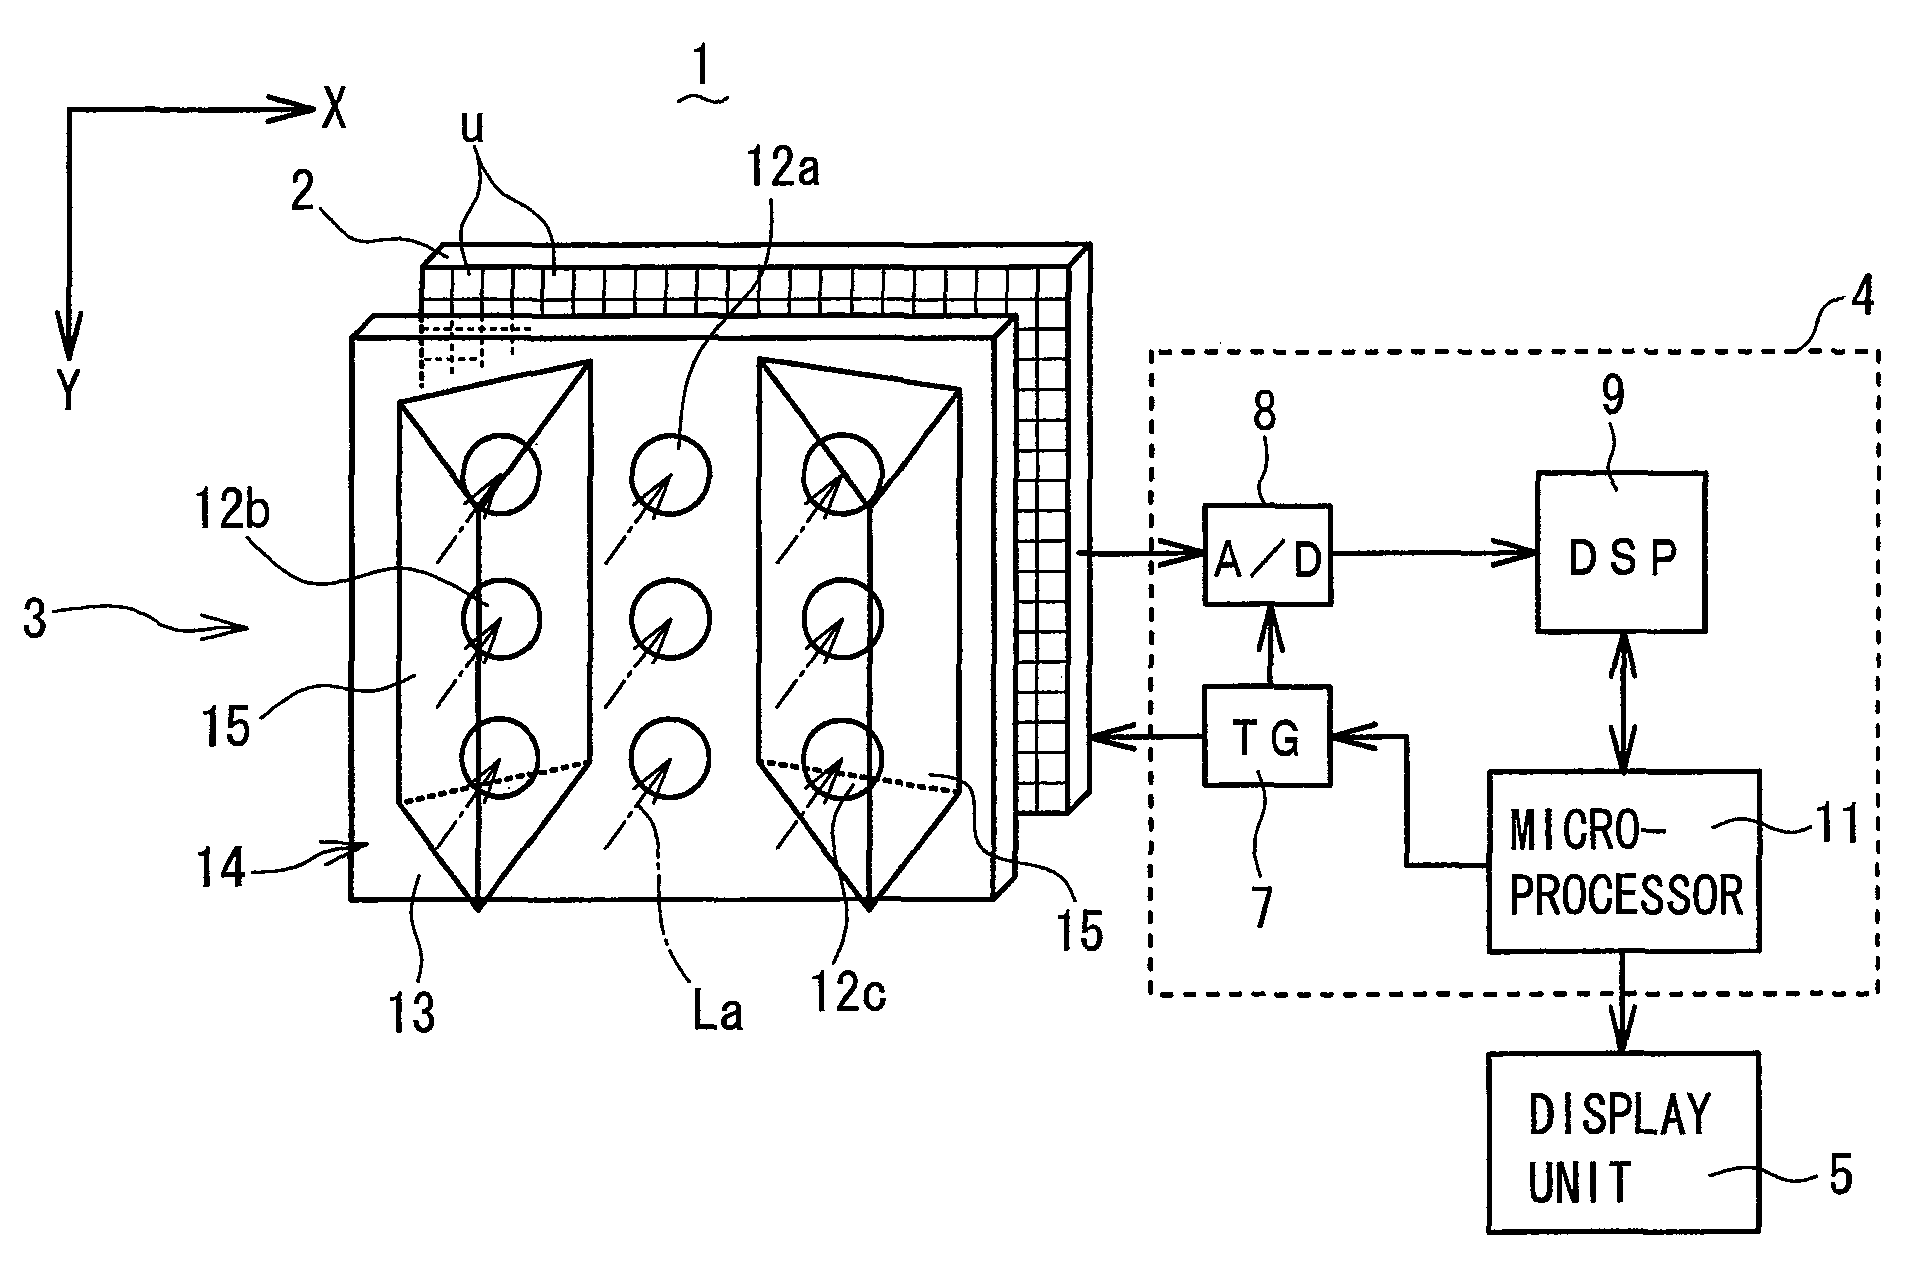 Motion detection imaging device